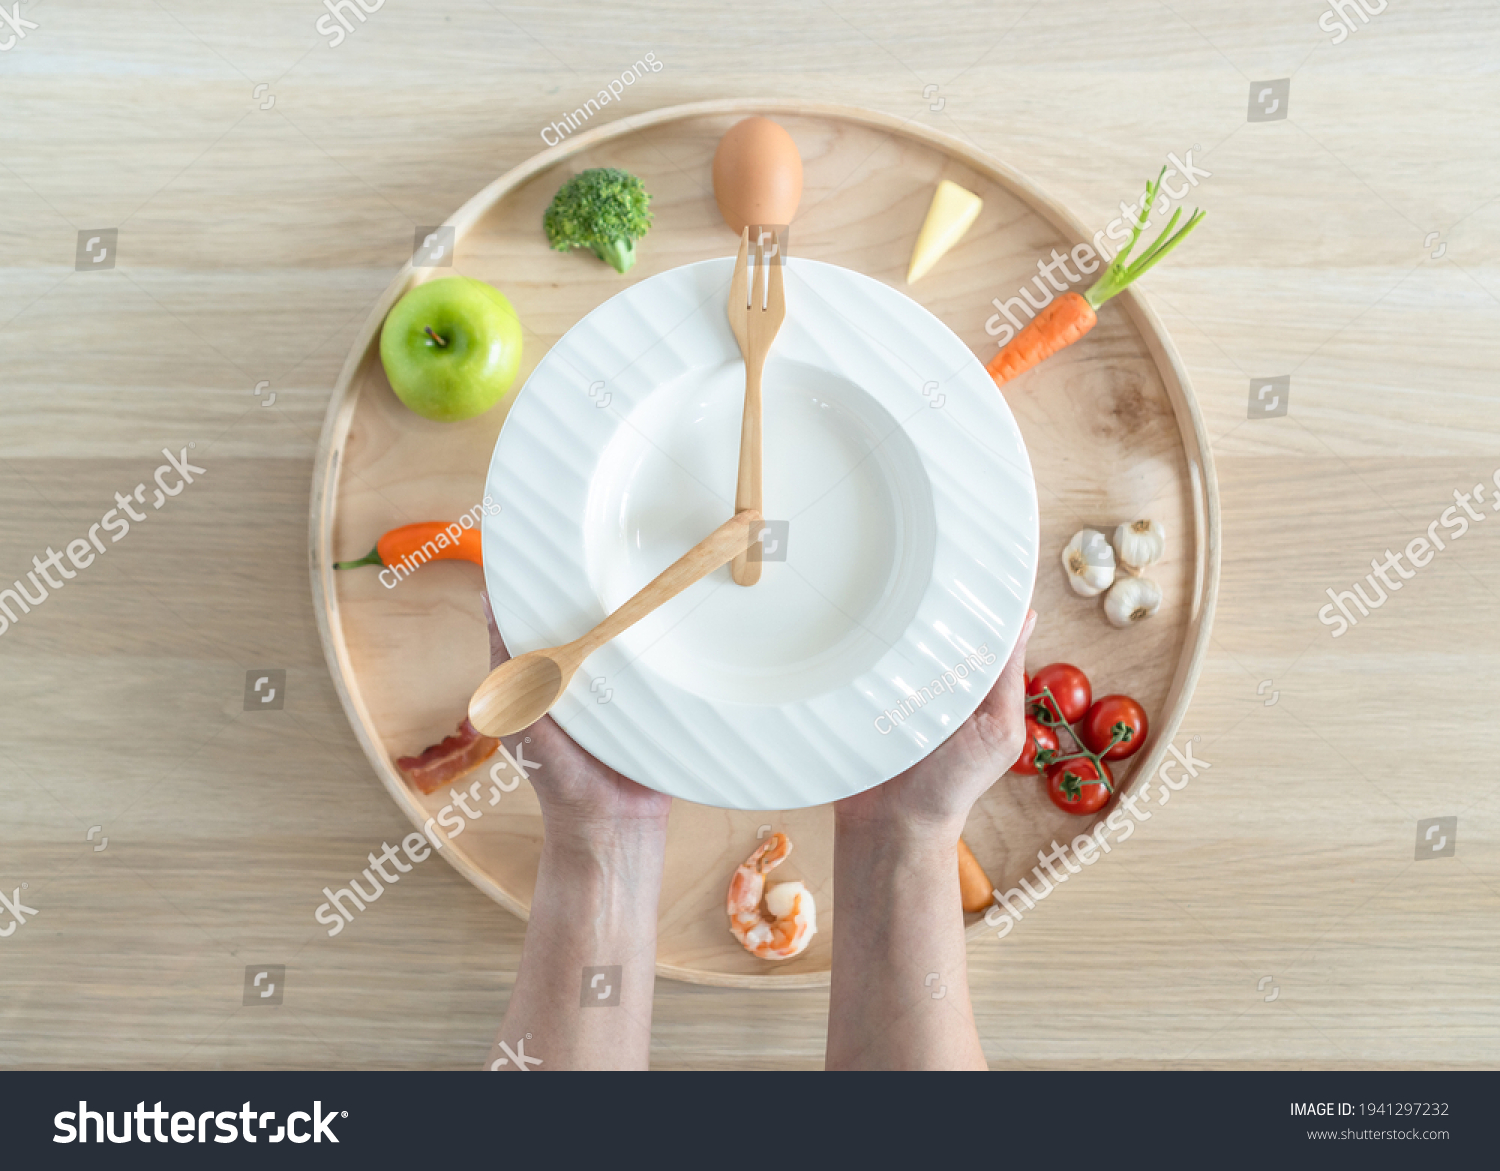 Intermittent fasting IF diet concept with 8-hour clock timer for eating nutritional or keto low carb, high fat and protien food meal healthy dish and 16-hour skipping meal for weight loss #1941297232